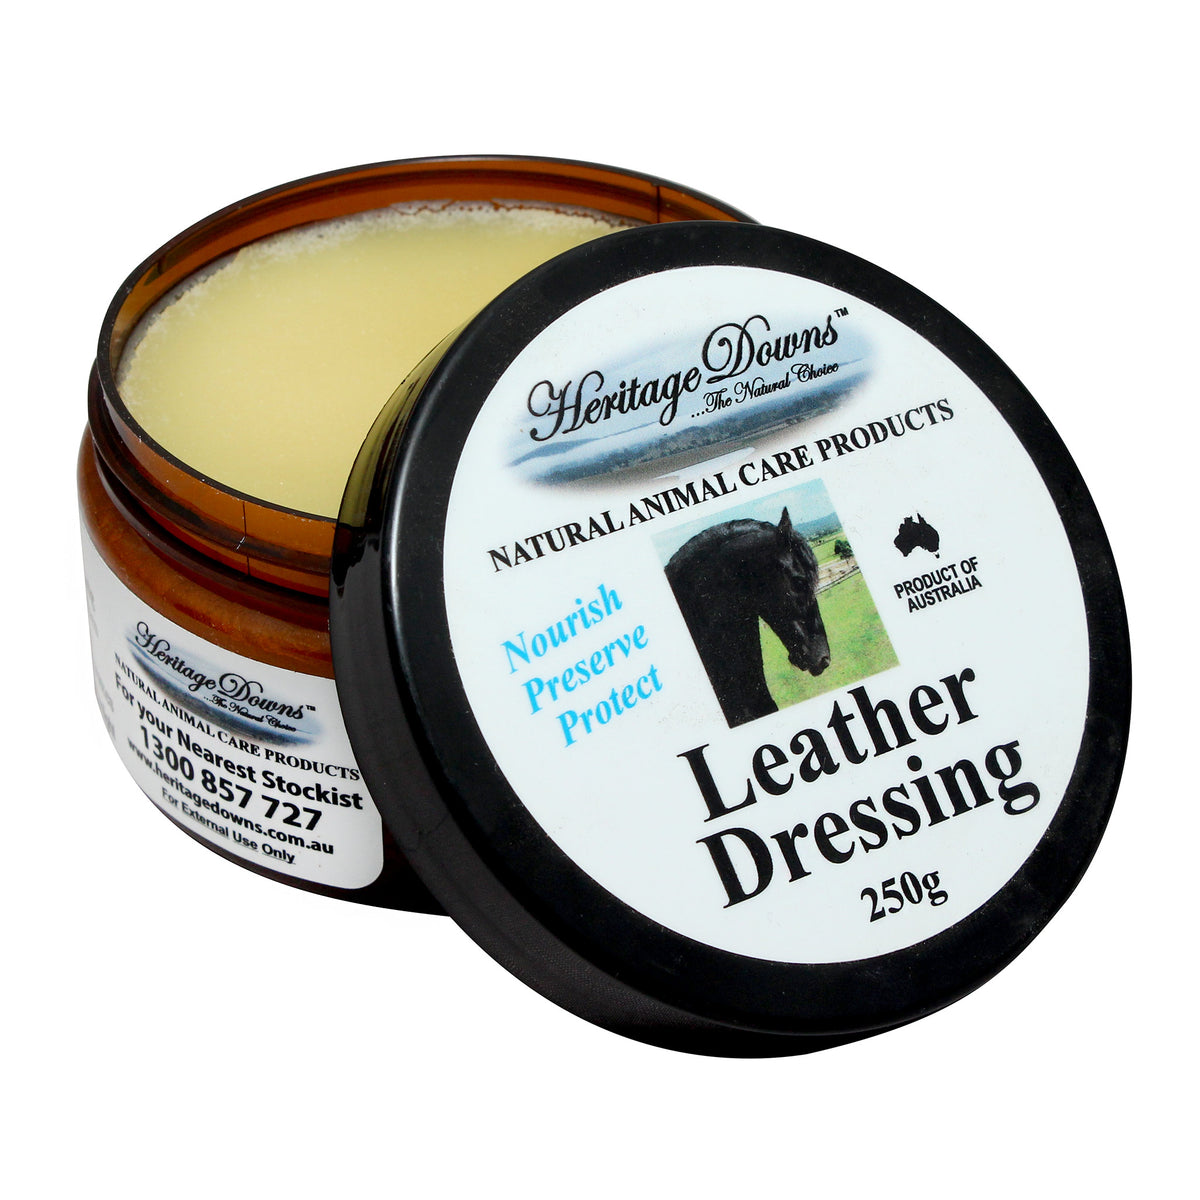 Heritage Downs Leather Dressing 250g